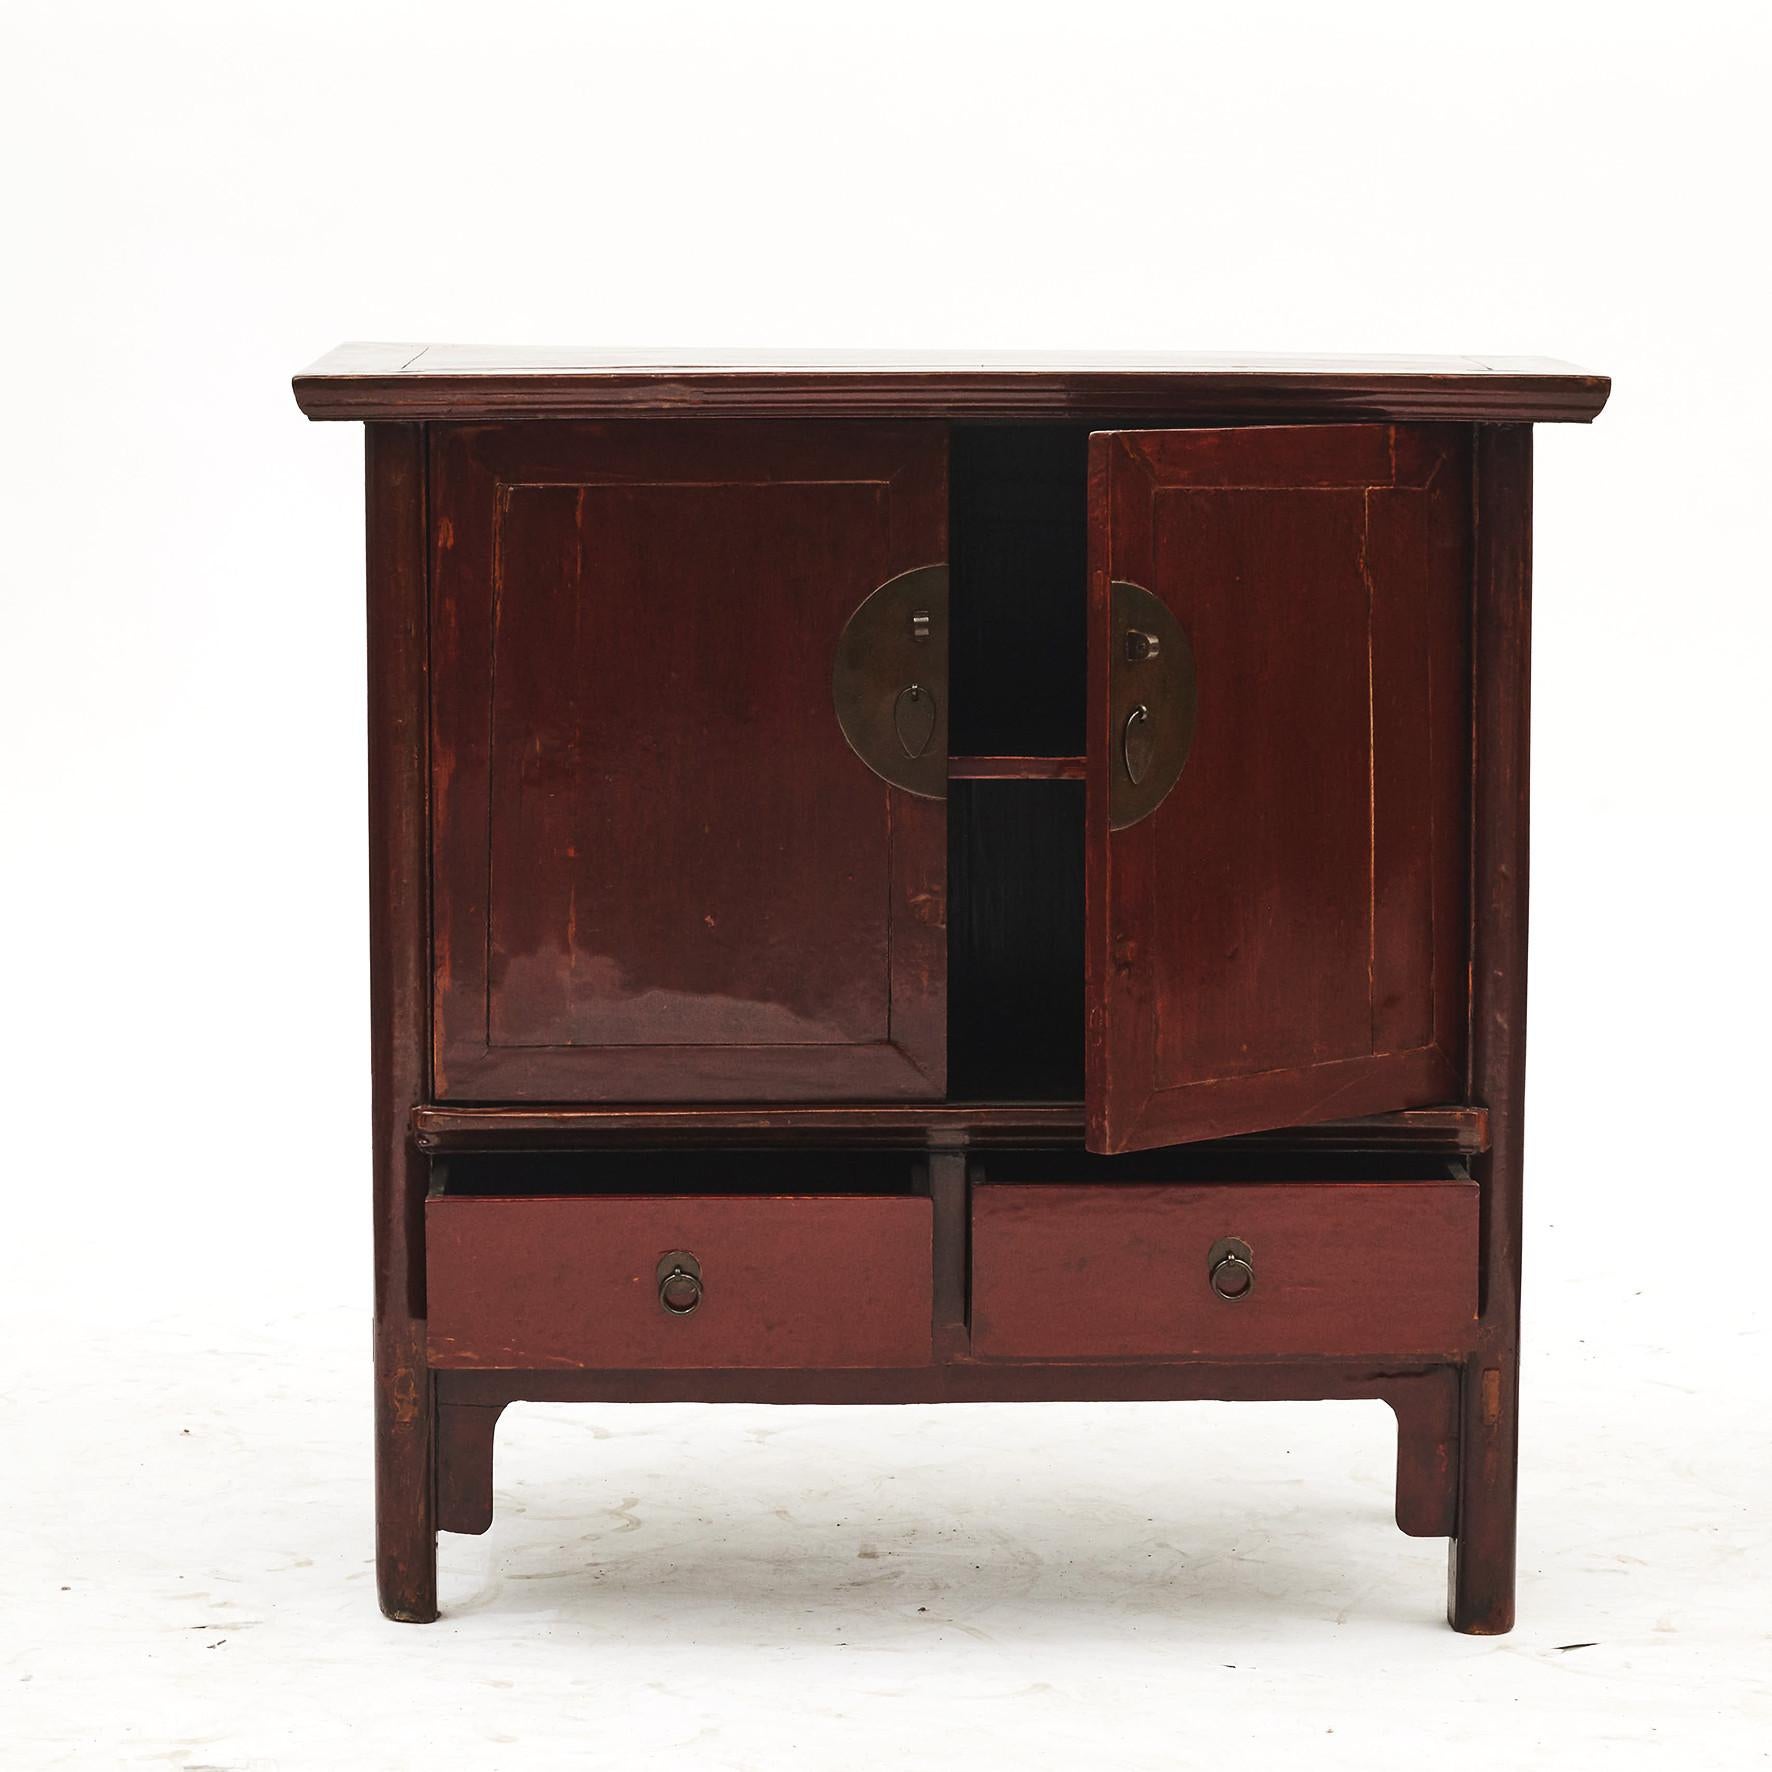 Qing Mid-19th Century Original Red Lacquer Cabinet from Shanxi Province